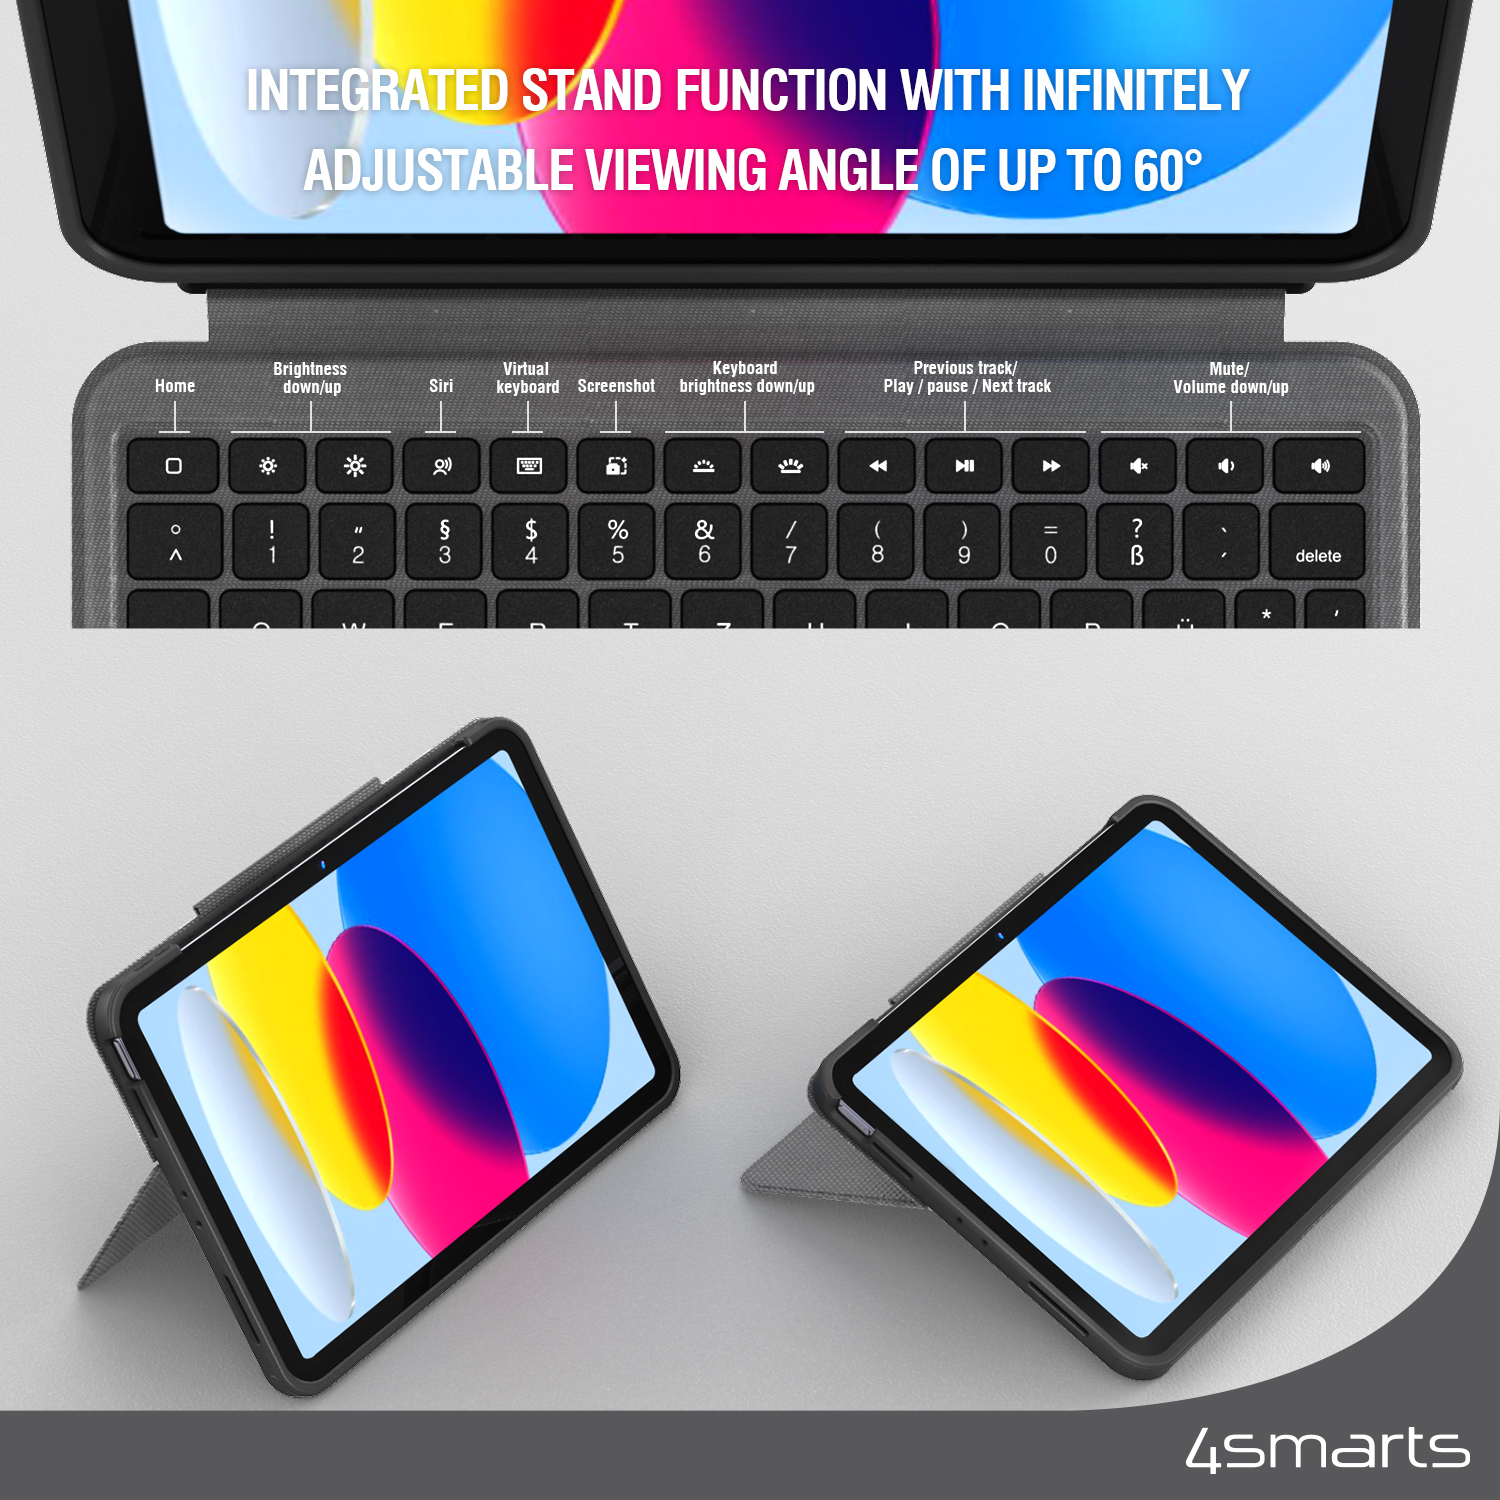 The 4smarts Case 2in1 Solid iPad Keyboard has an integrated stand function with adjustable viewing angle.